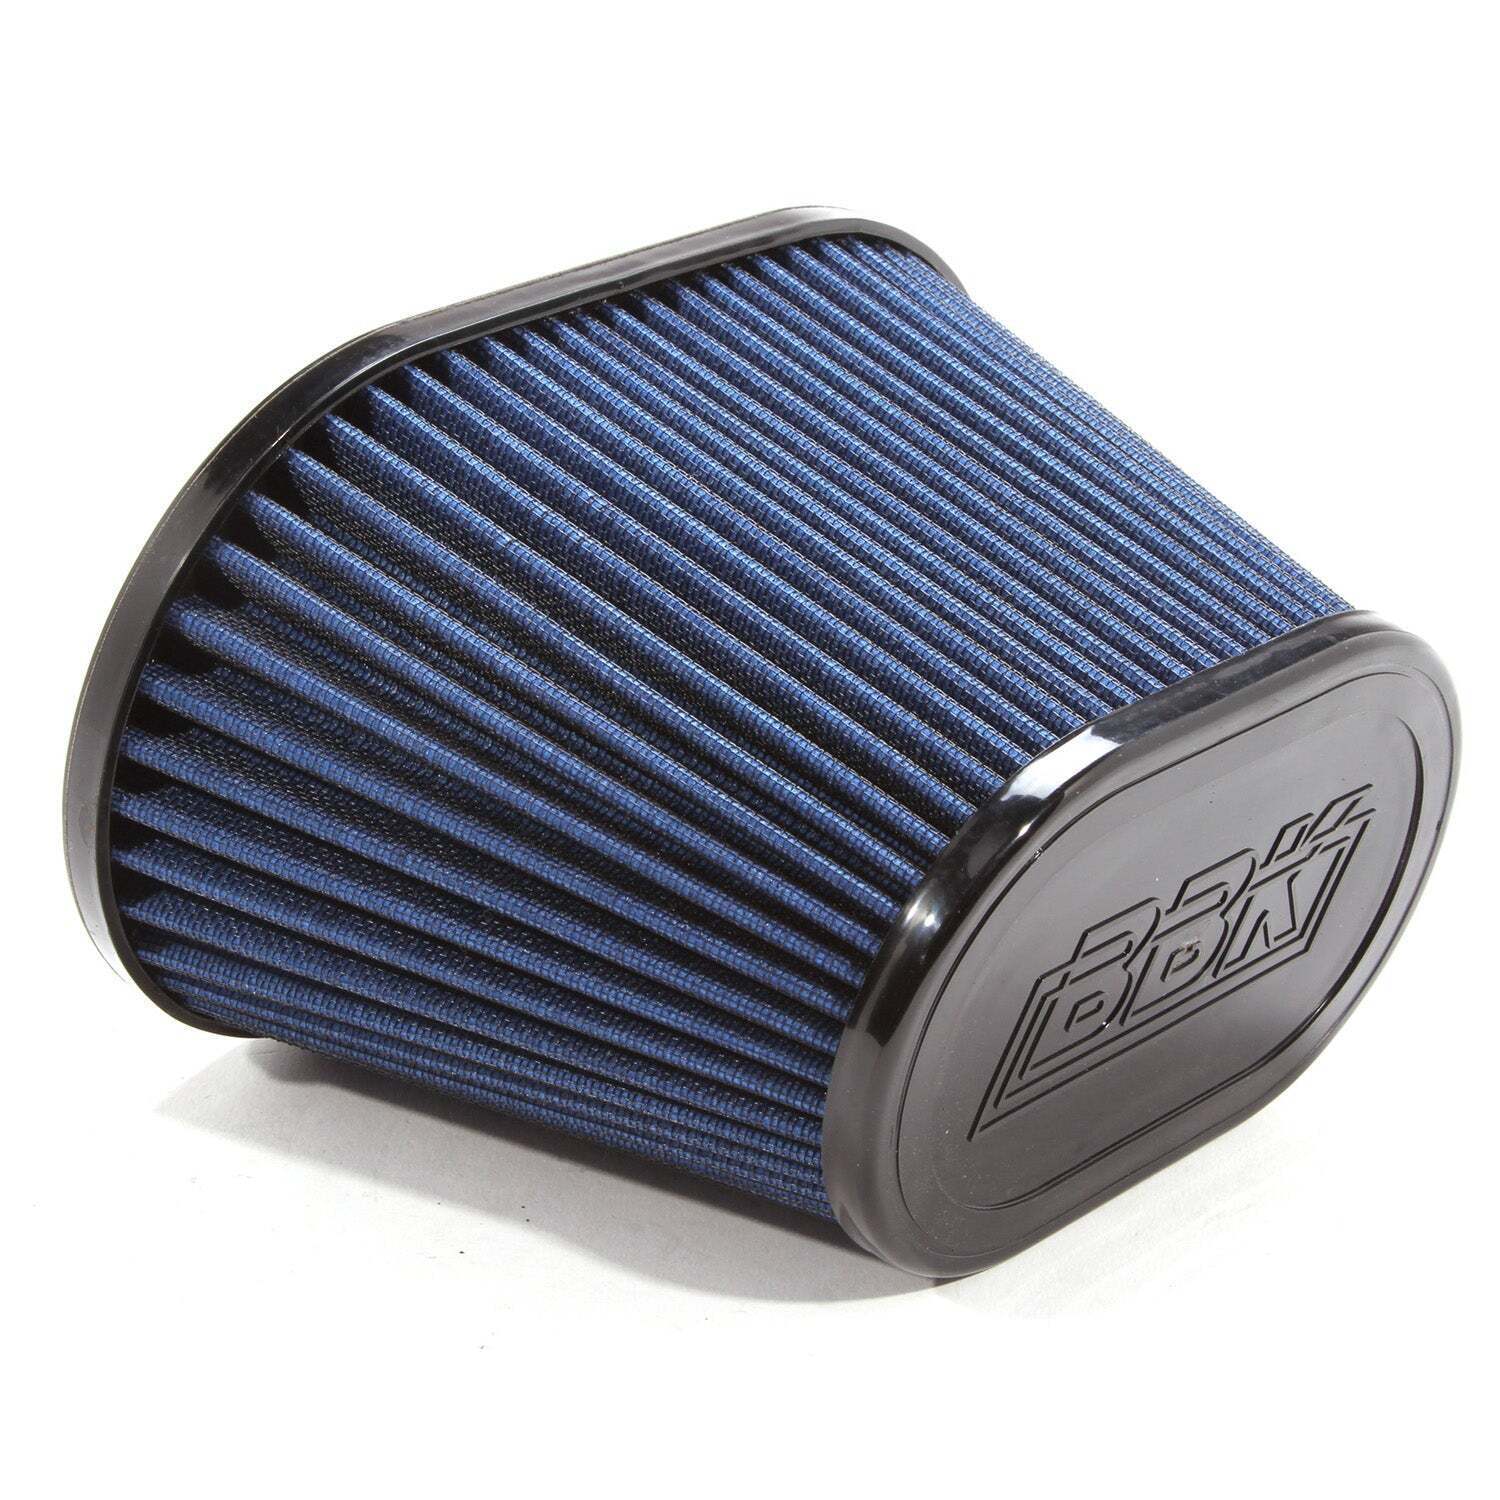 BBK BLUE REPLACEMENT COLD AIR FILTER (FITS KITS 1712 1557 7000 7001)